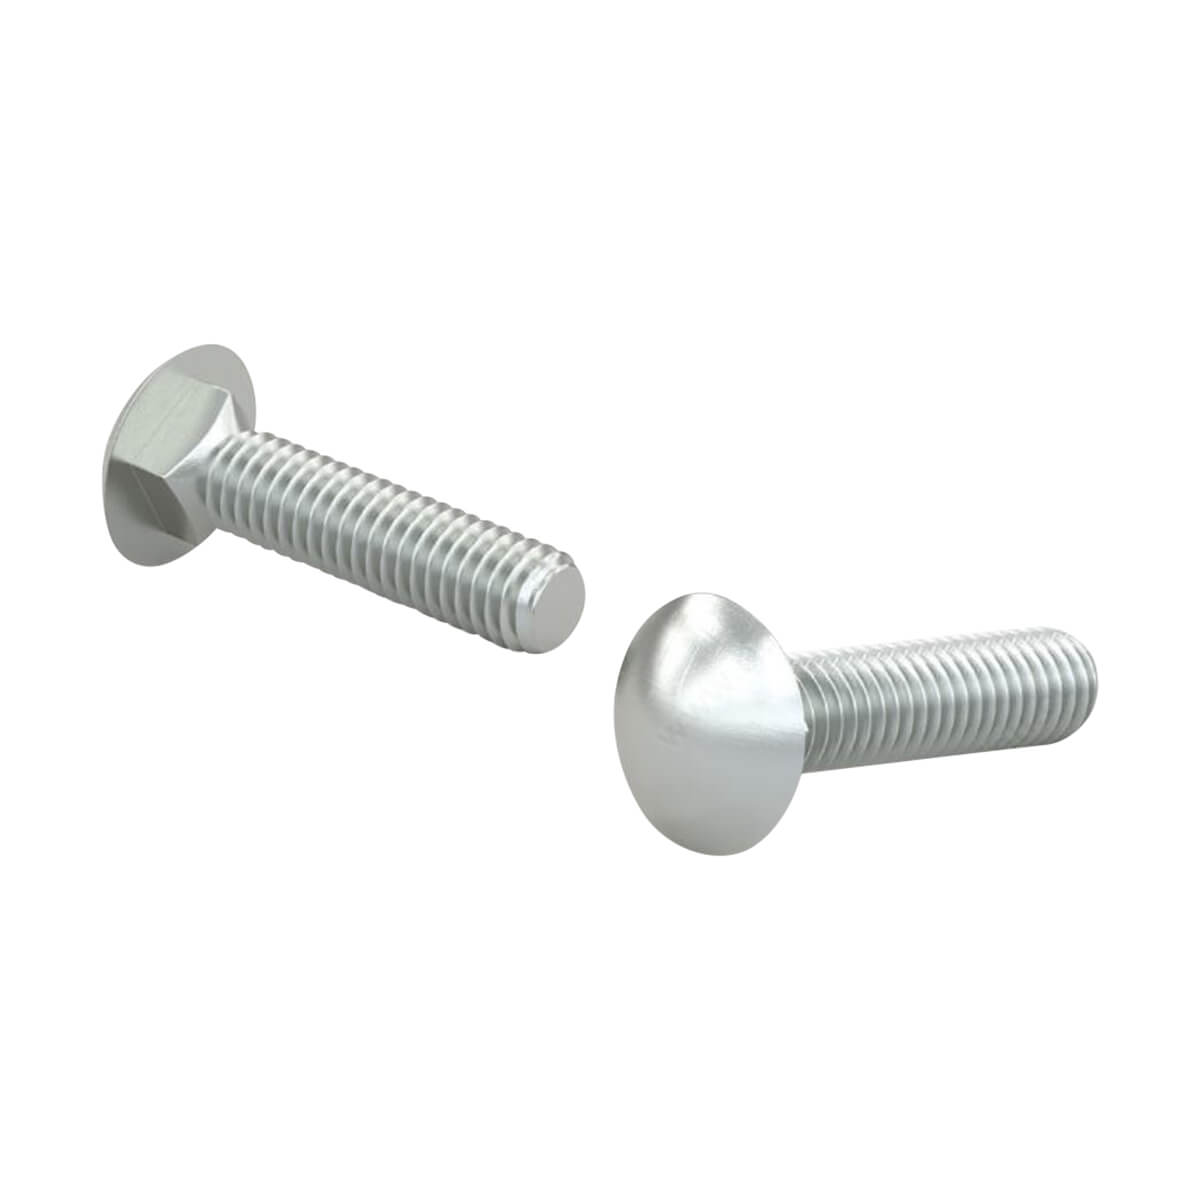 Round Head Carriage Bolts - 1/2"